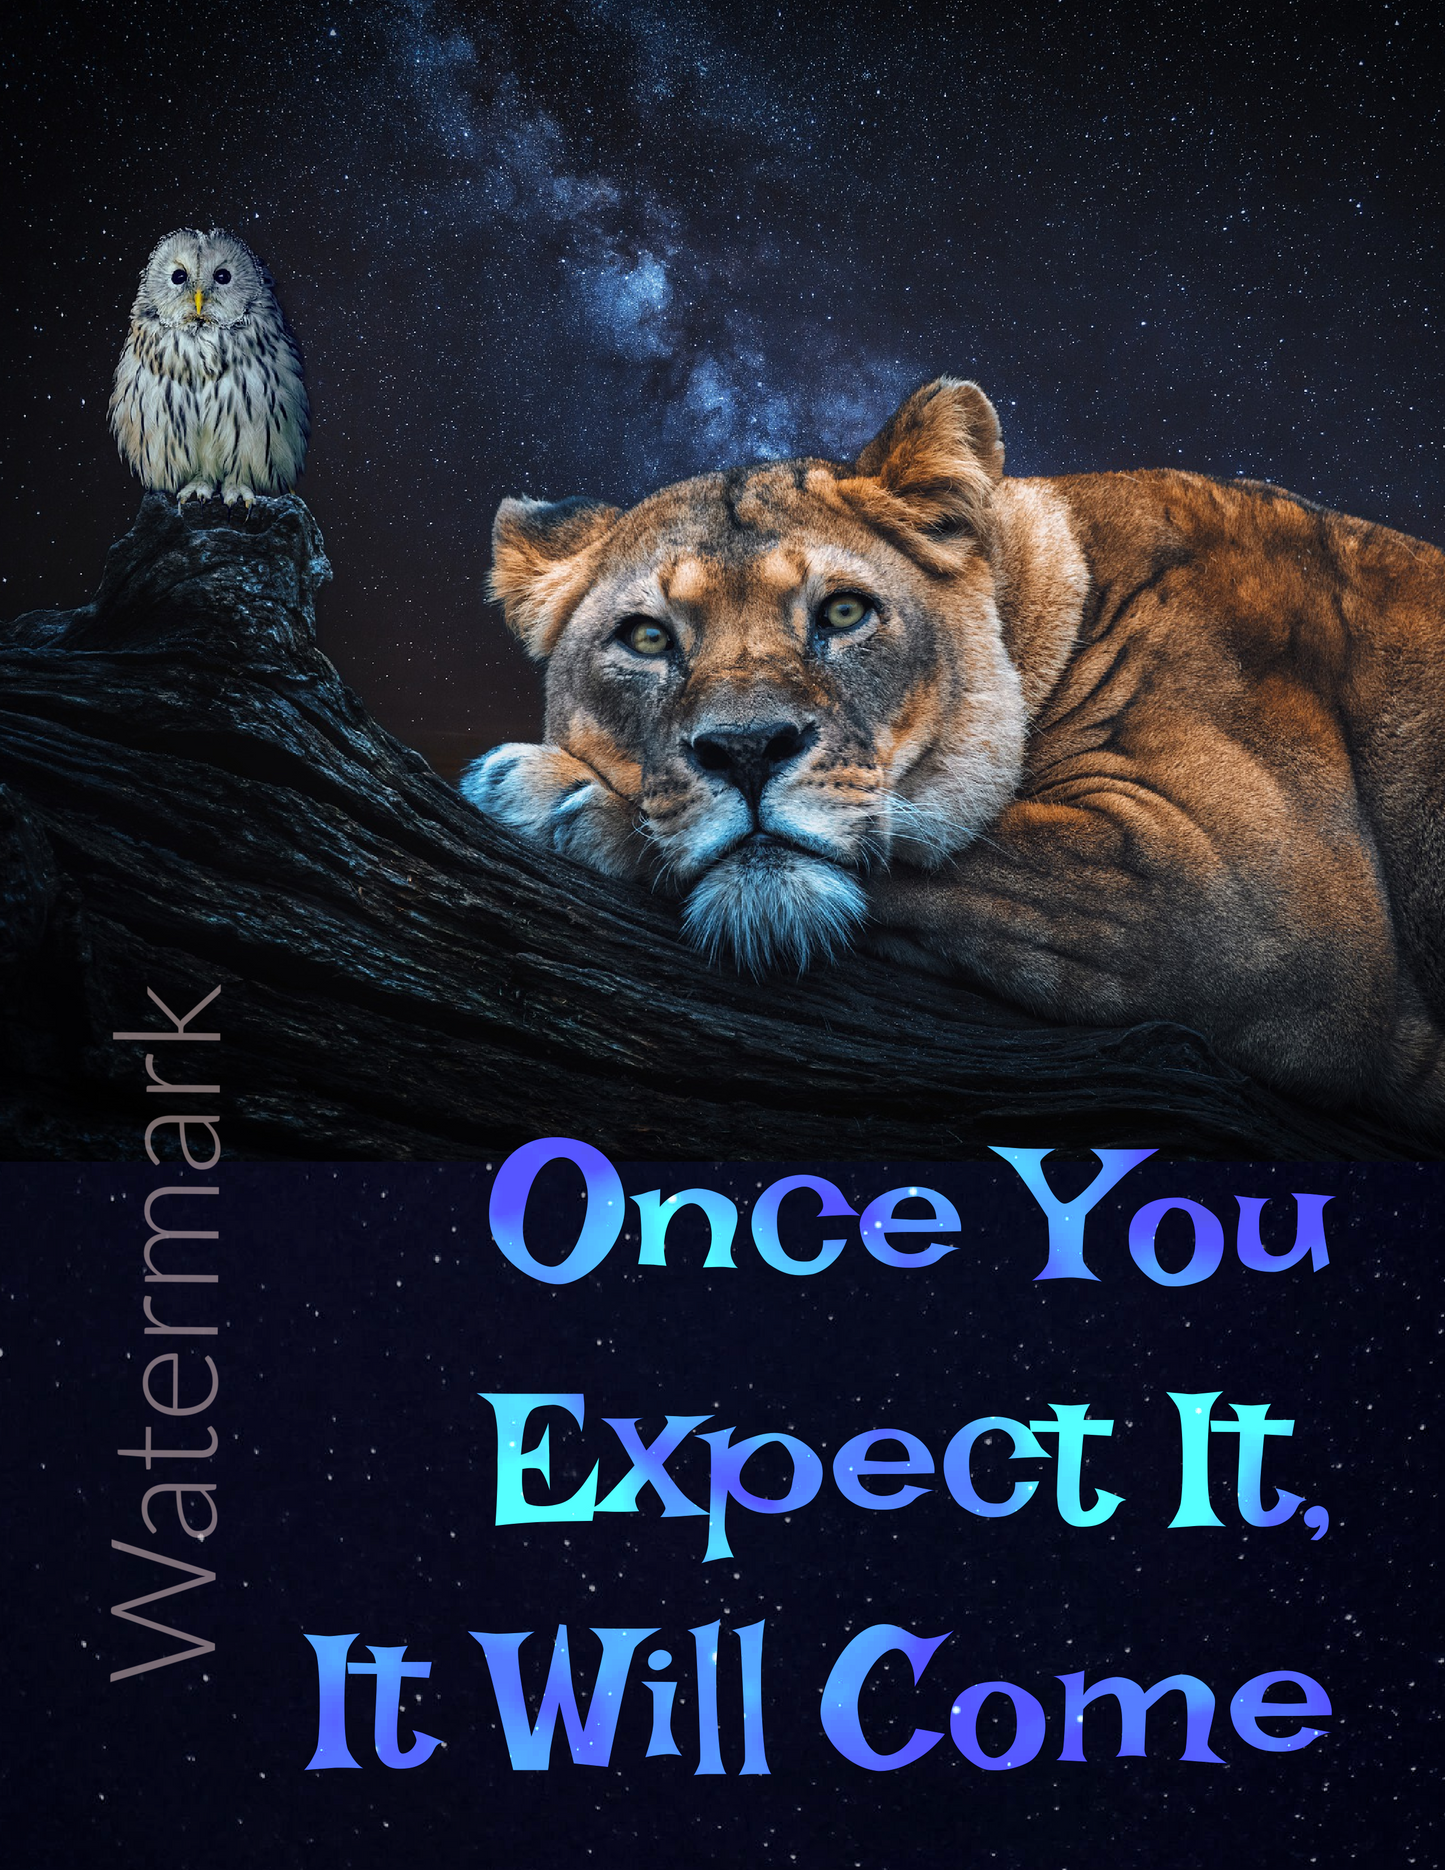 Once You Expect It, It Will Come - Abraham Hicks - Instant Wall Art